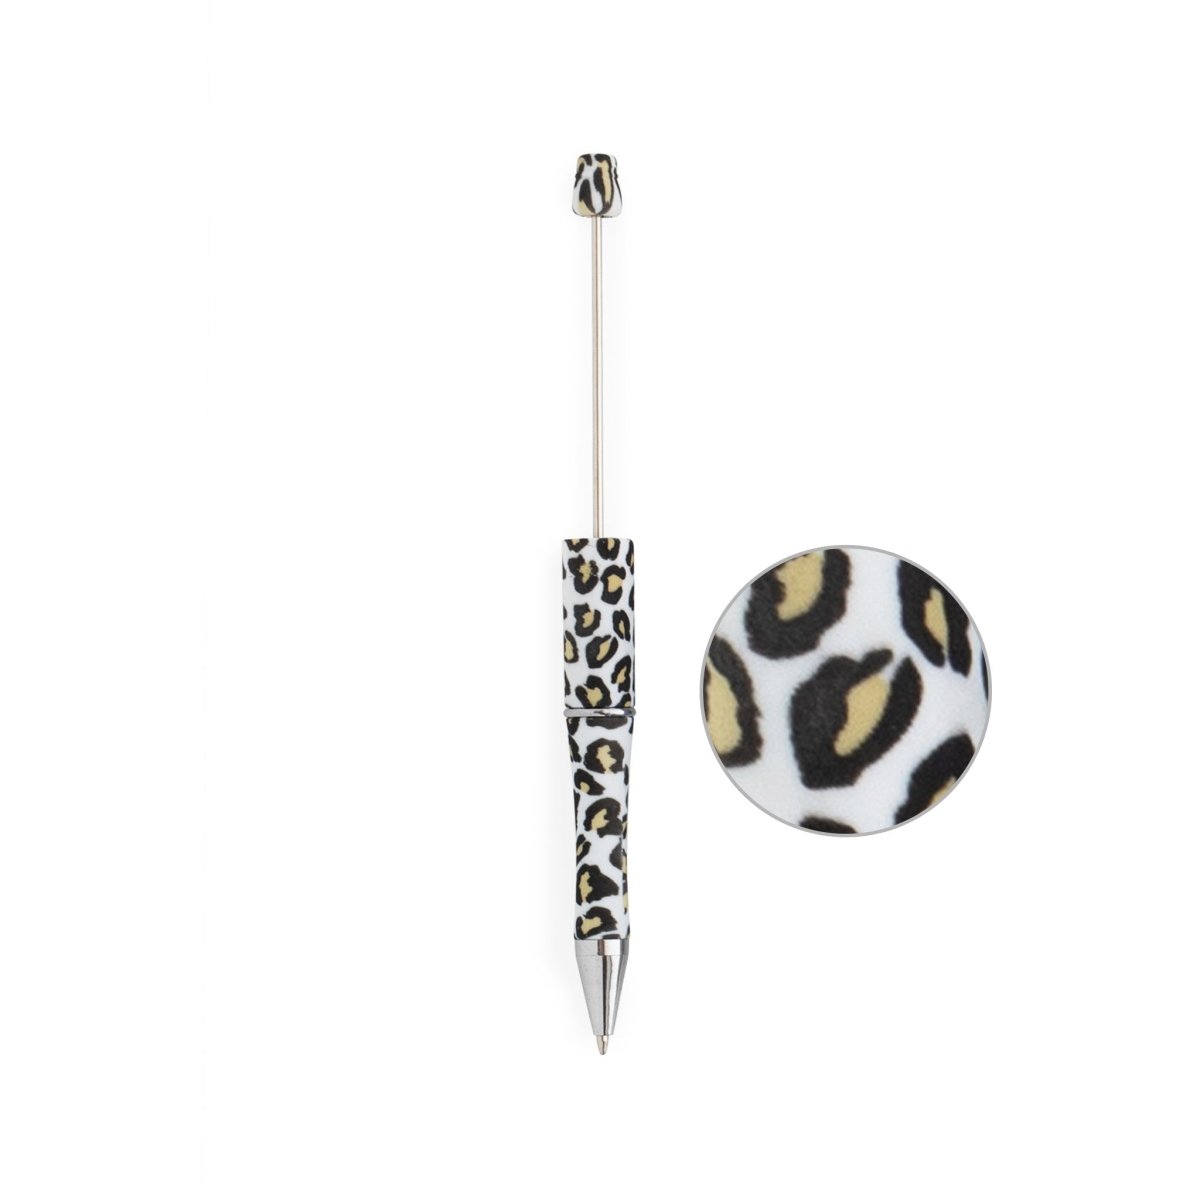 Beadables Pens - Plastic - Printed White Leopard from Cara & Co Craft Supply